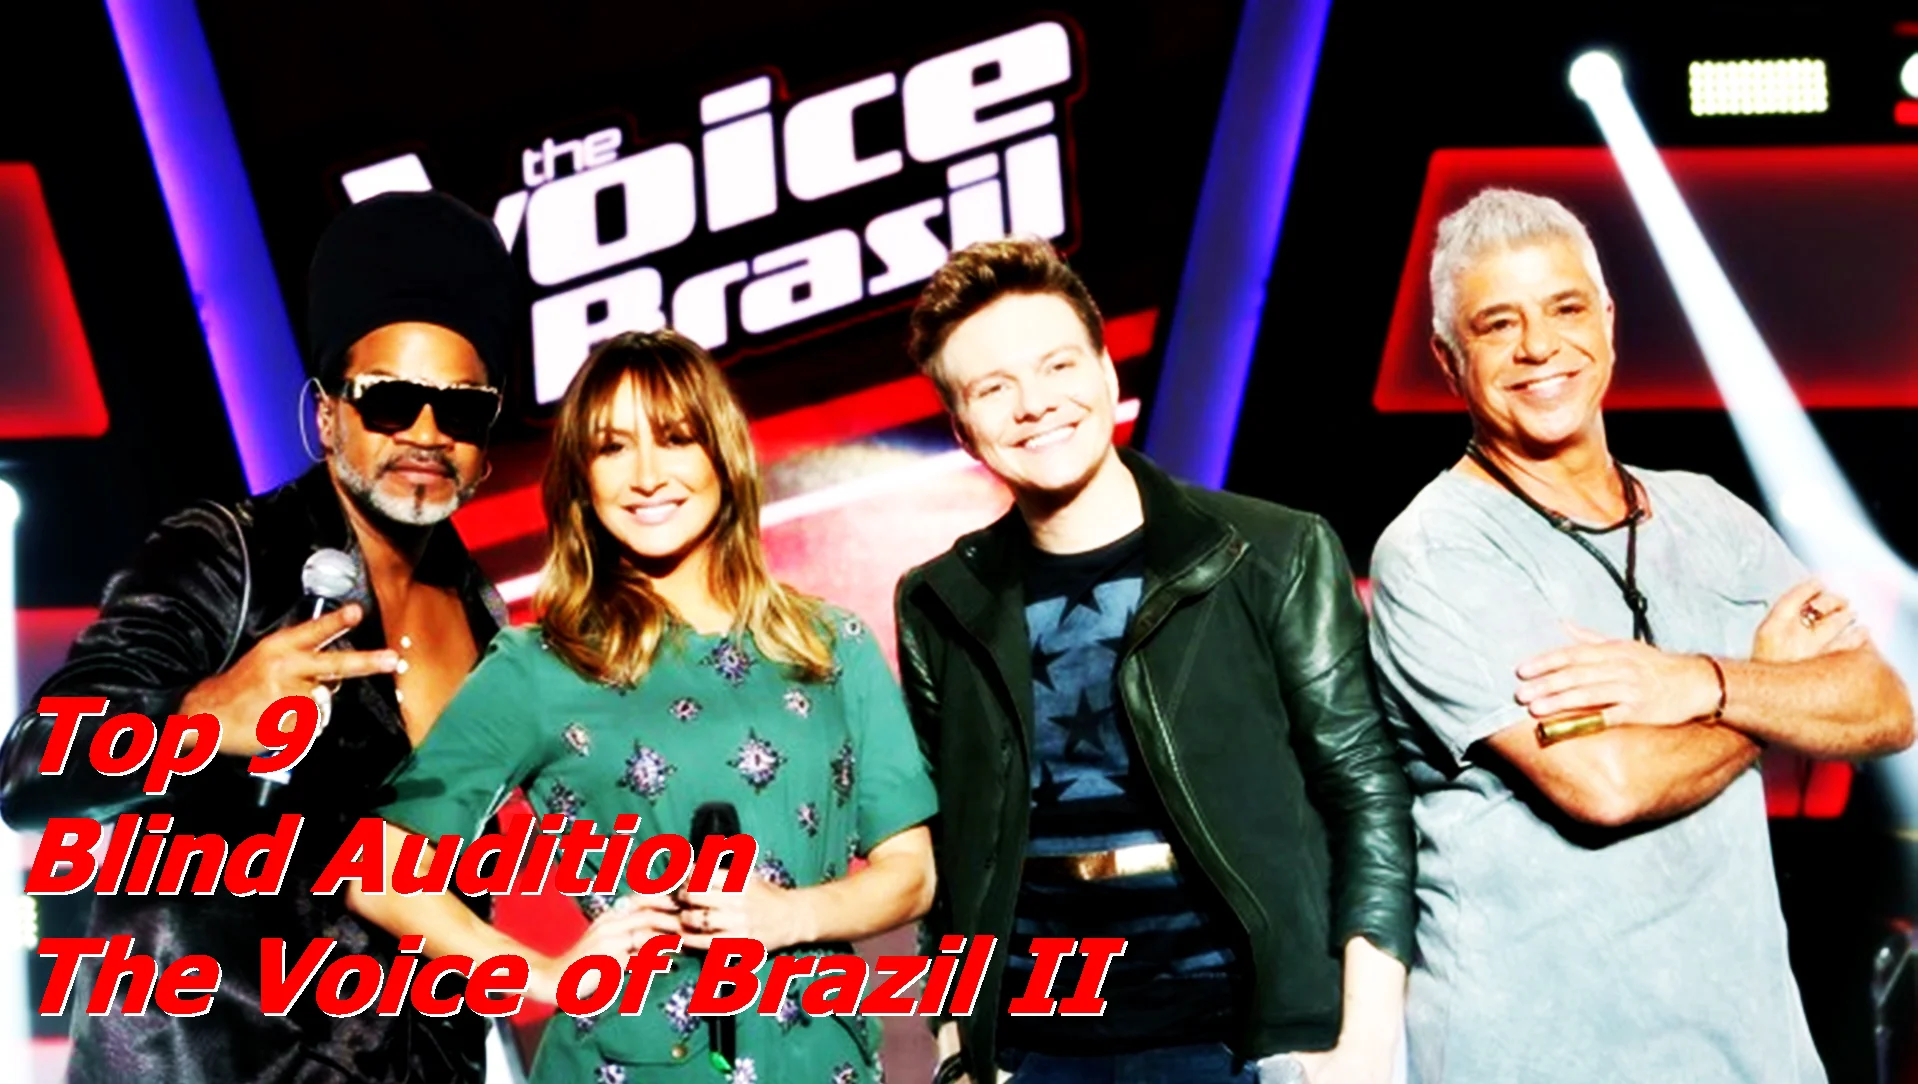 Top 9 Battle & Knockout (The Voice of Brazil II) on Vimeo